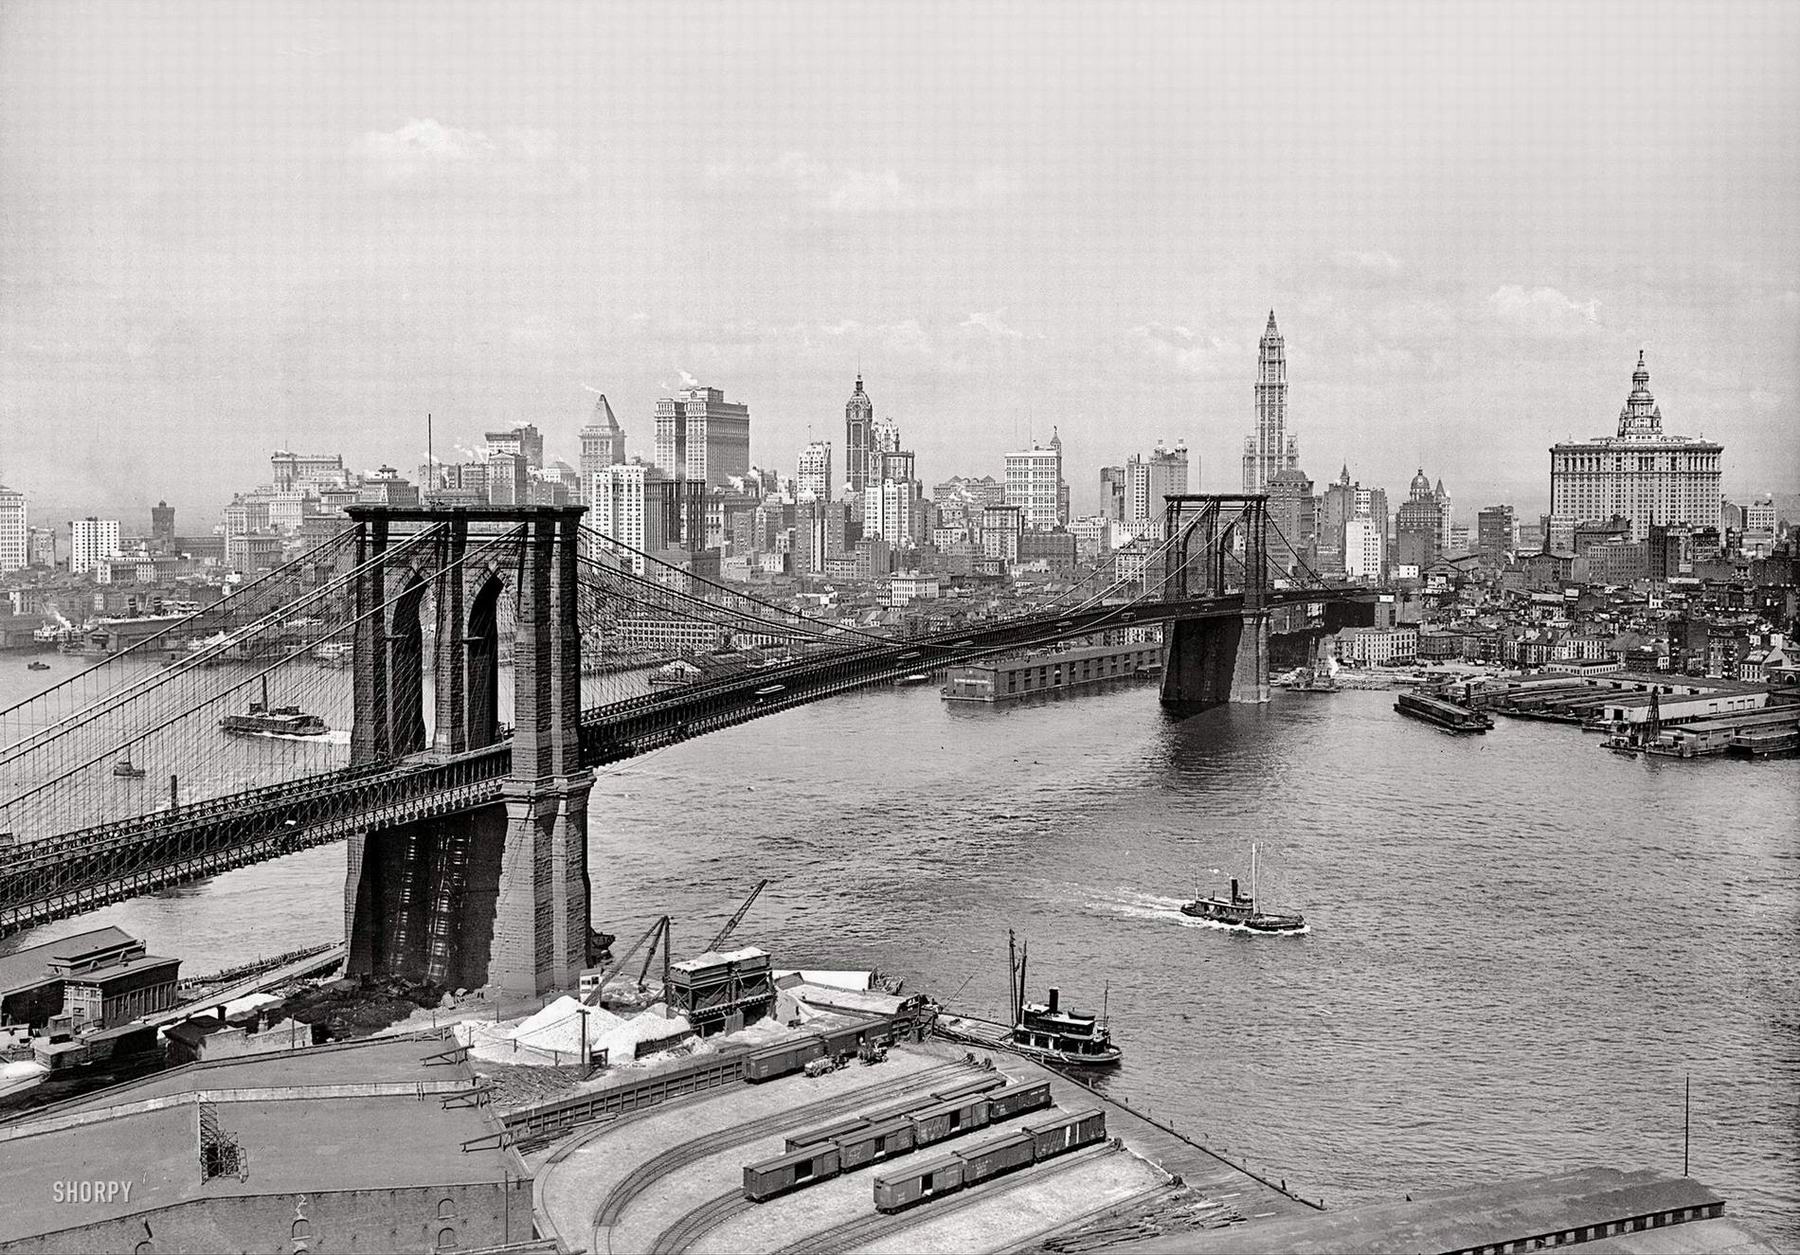 New York circa 1915. Brooklyn Bridge, East River. The Woolworth Building, Singer, Bankers Trust, Hudson Terminal, Municipal and Park Row buildings are visible.jpg